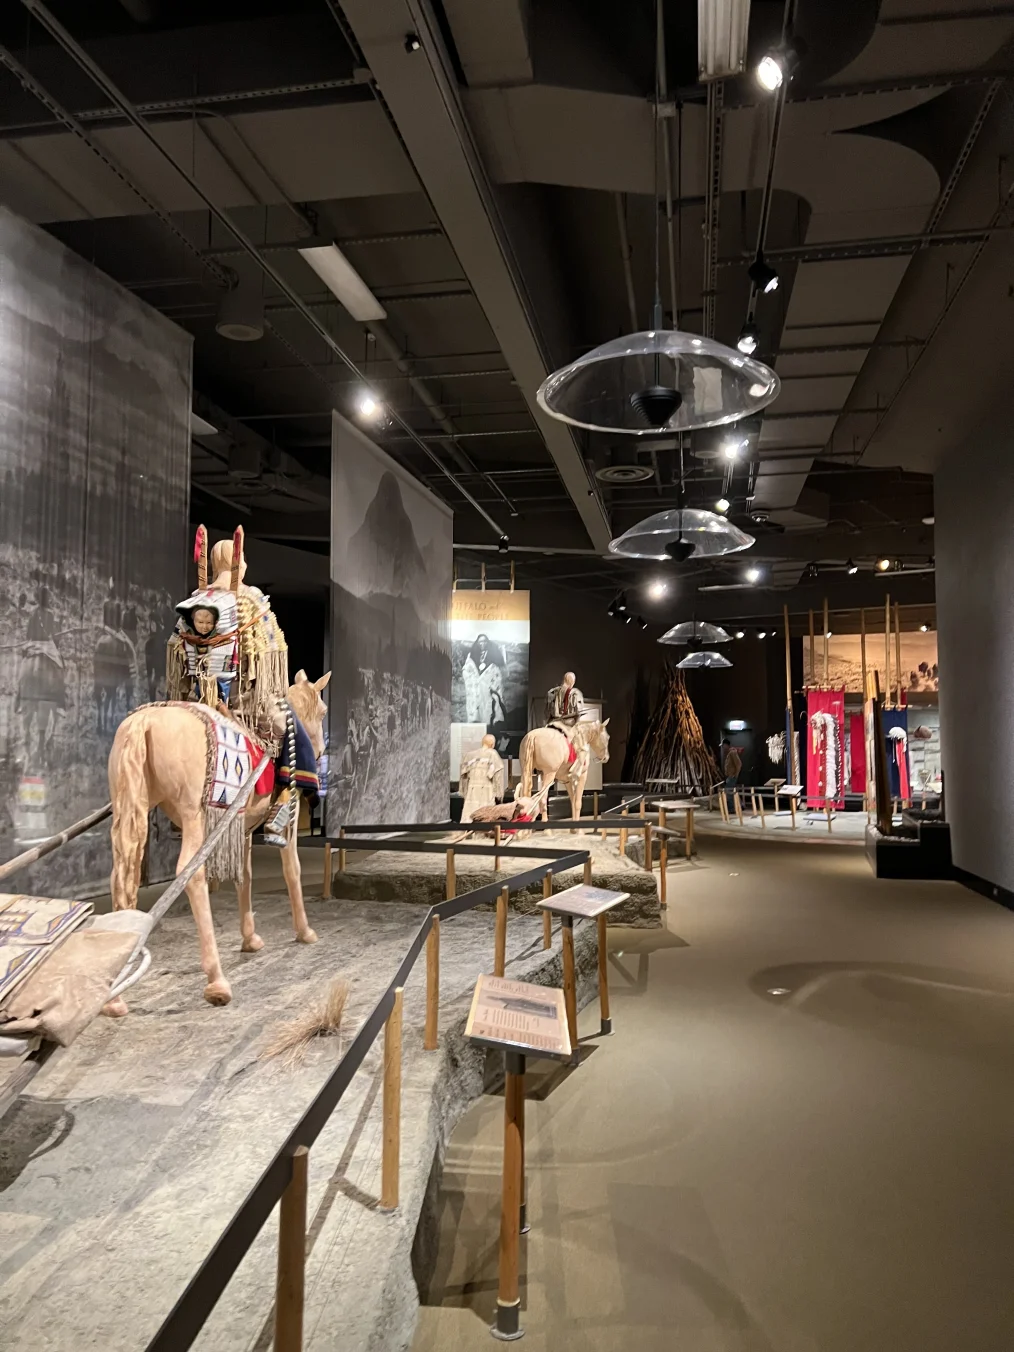 Inside an exhibit at the Plains Indian Museum in Cody, Wyoming. Indian artifacts, in addition to faux horse stations, can be seen in this exhibit space.